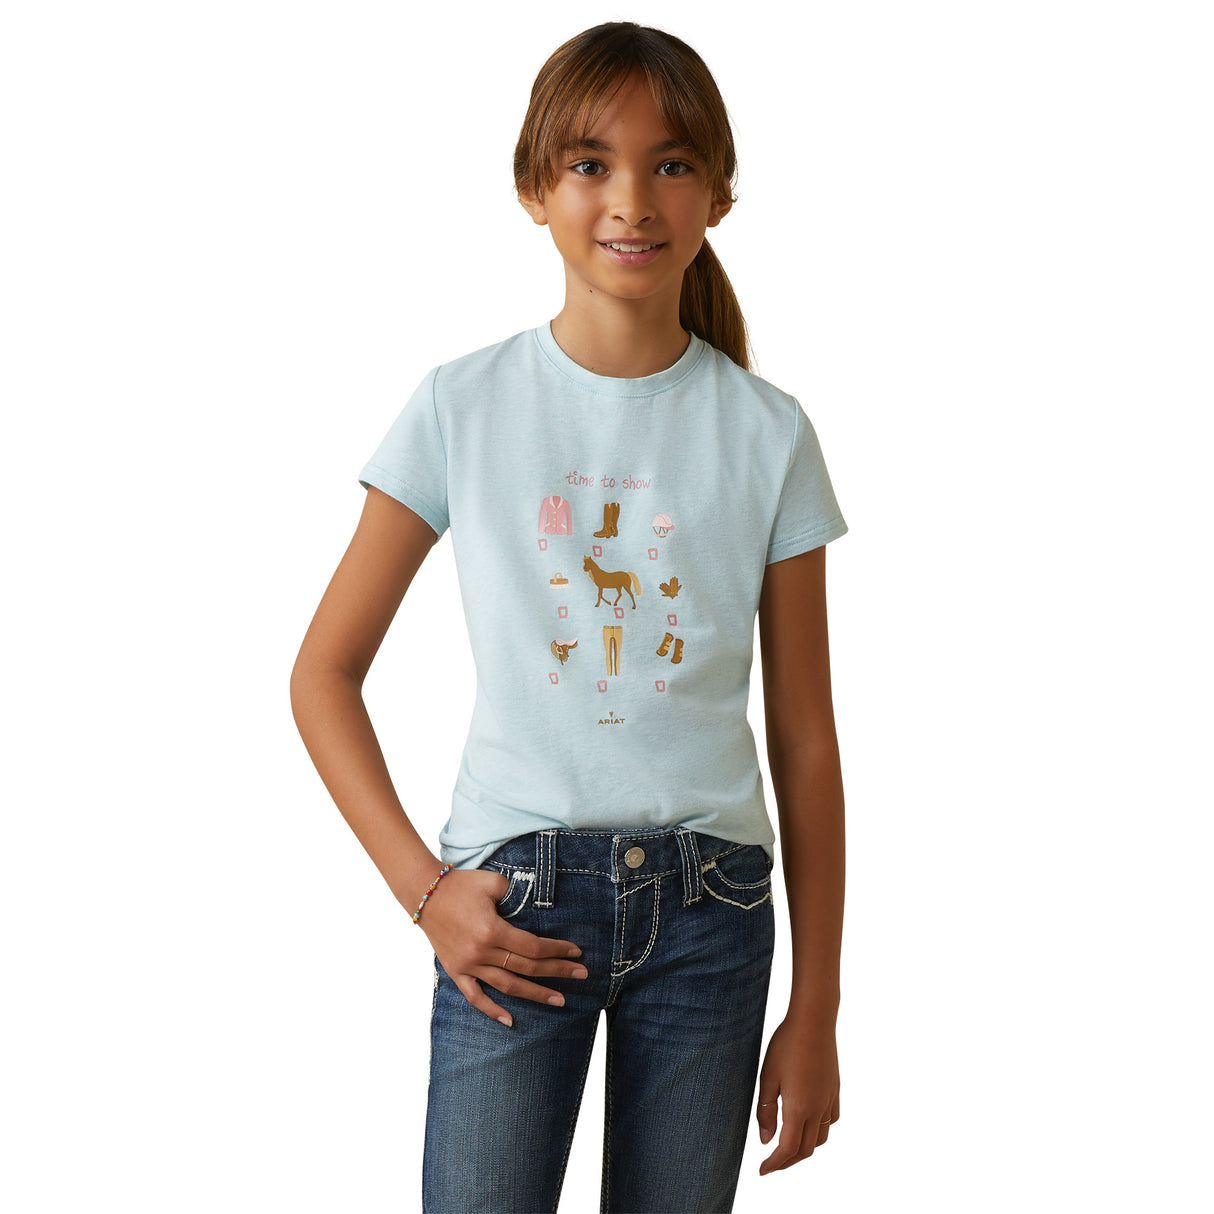 ARIAT® KIDS' TIME TO SHOW T-SHIRT